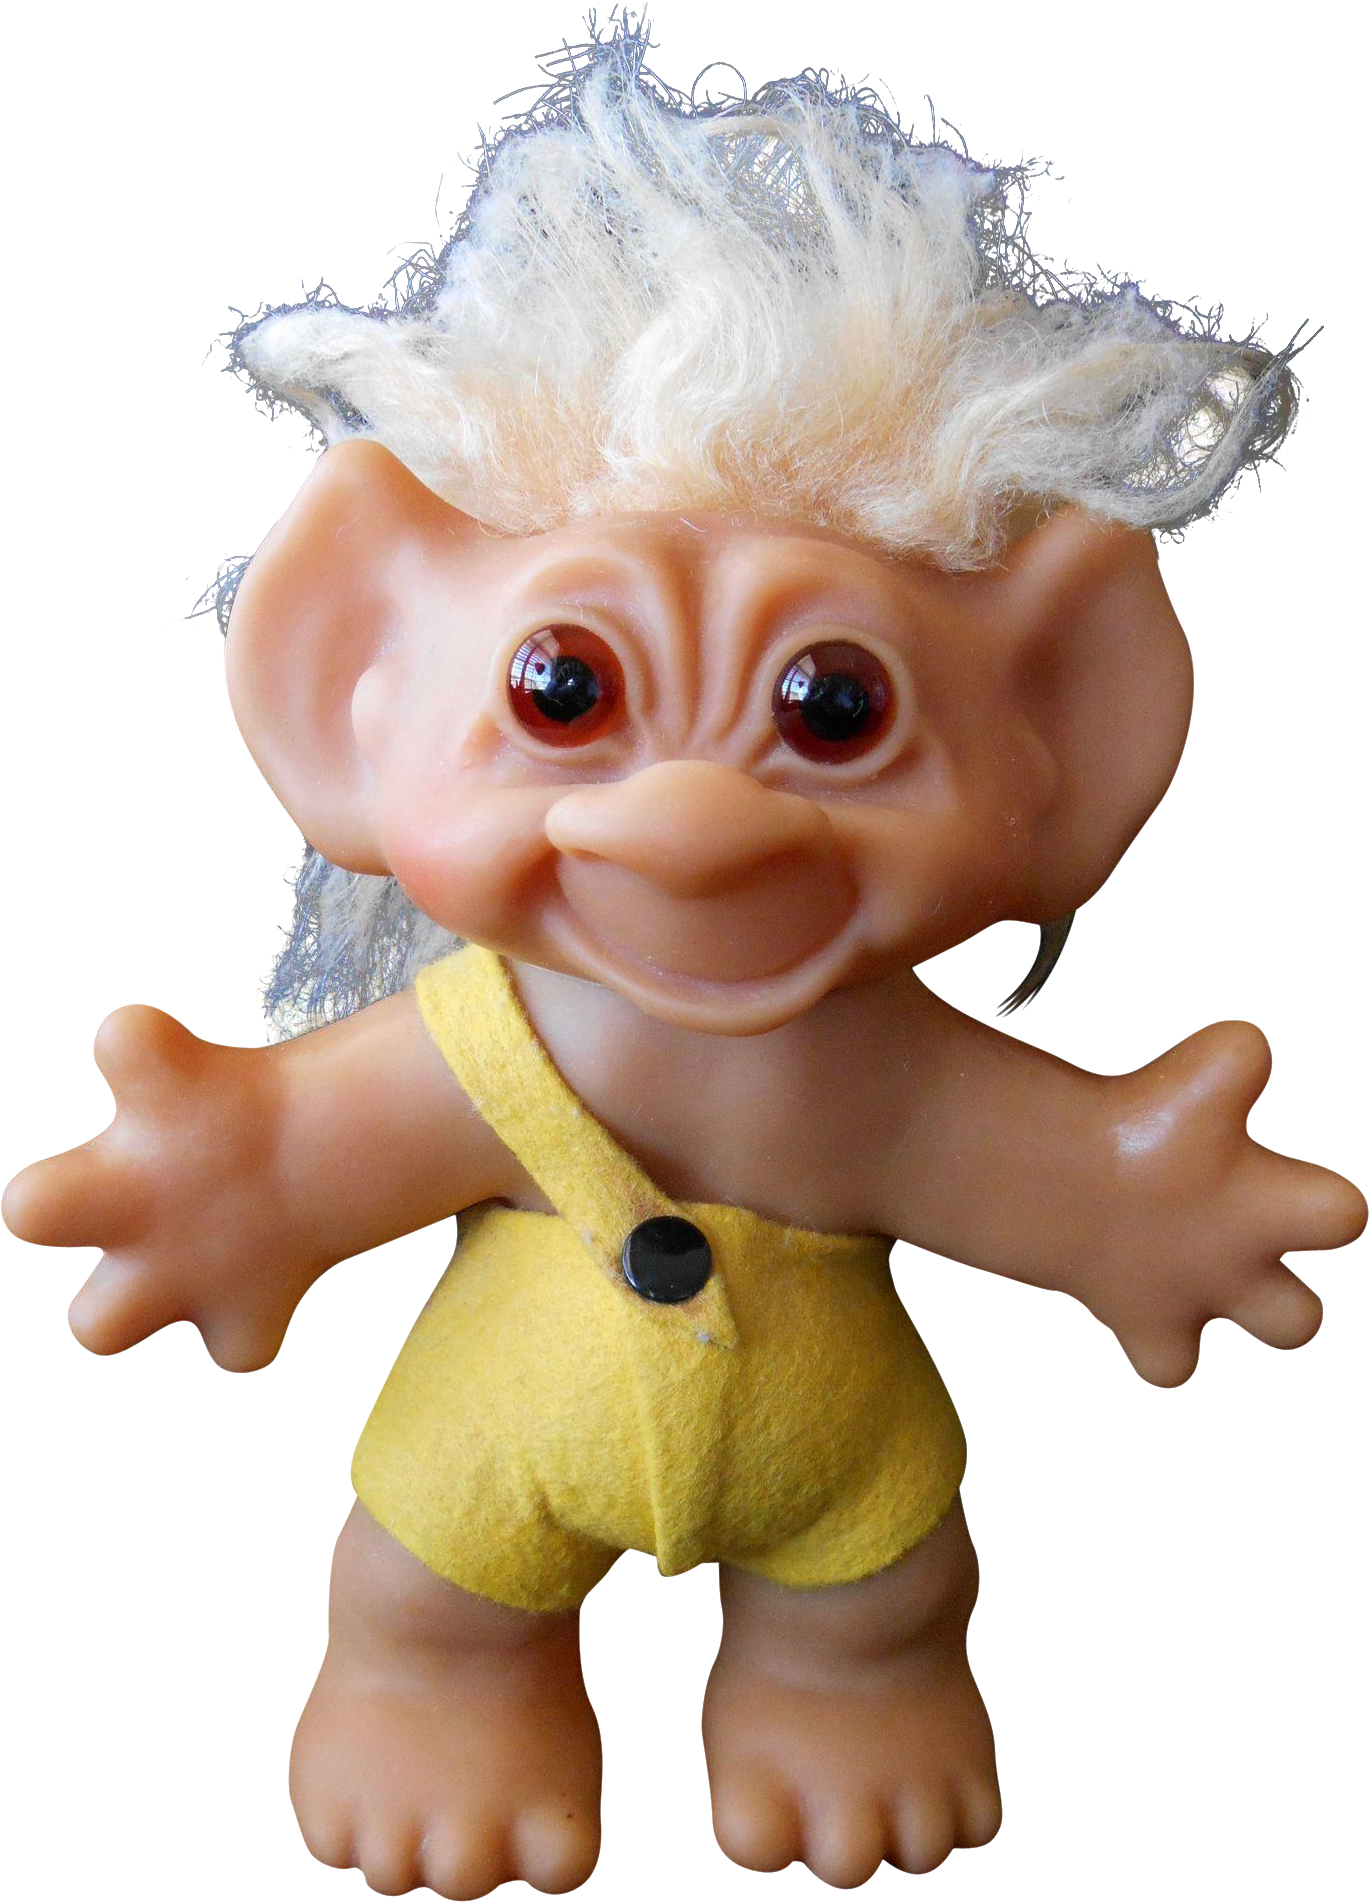 A Toy Troll With White Hair And Yellow Shorts